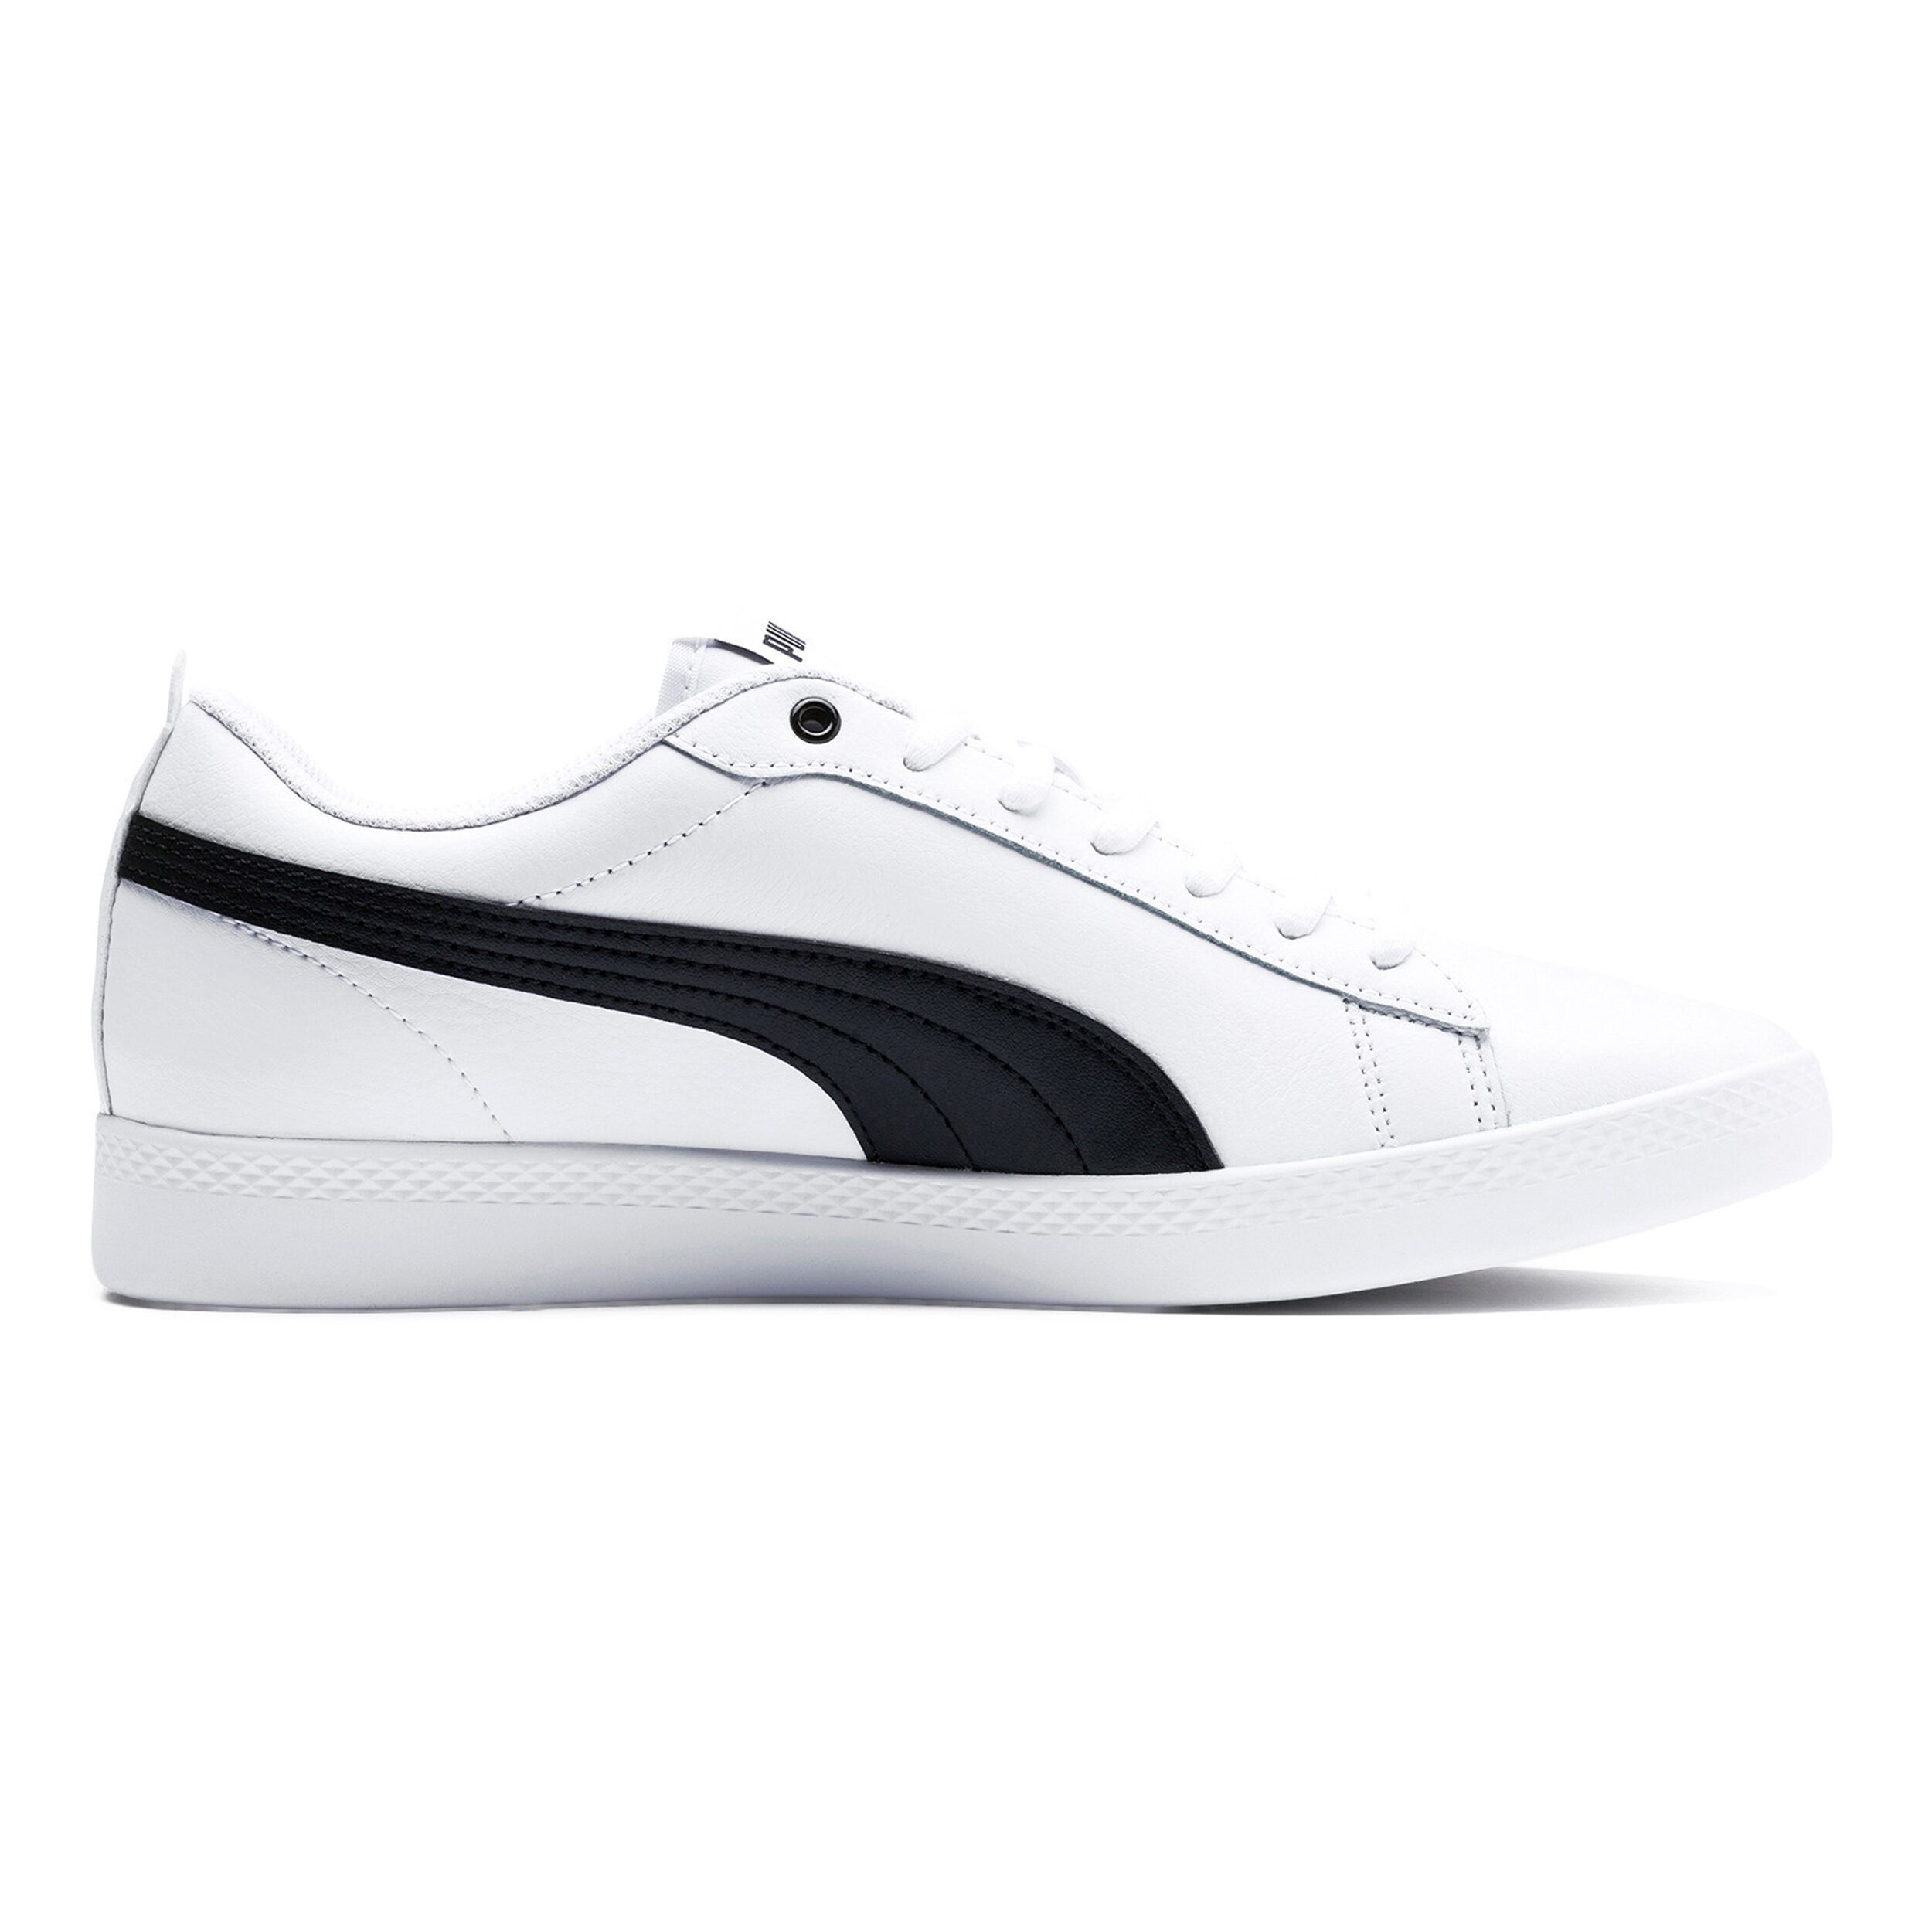 Buy Tennis shoes from Puma online | Tennis-Point